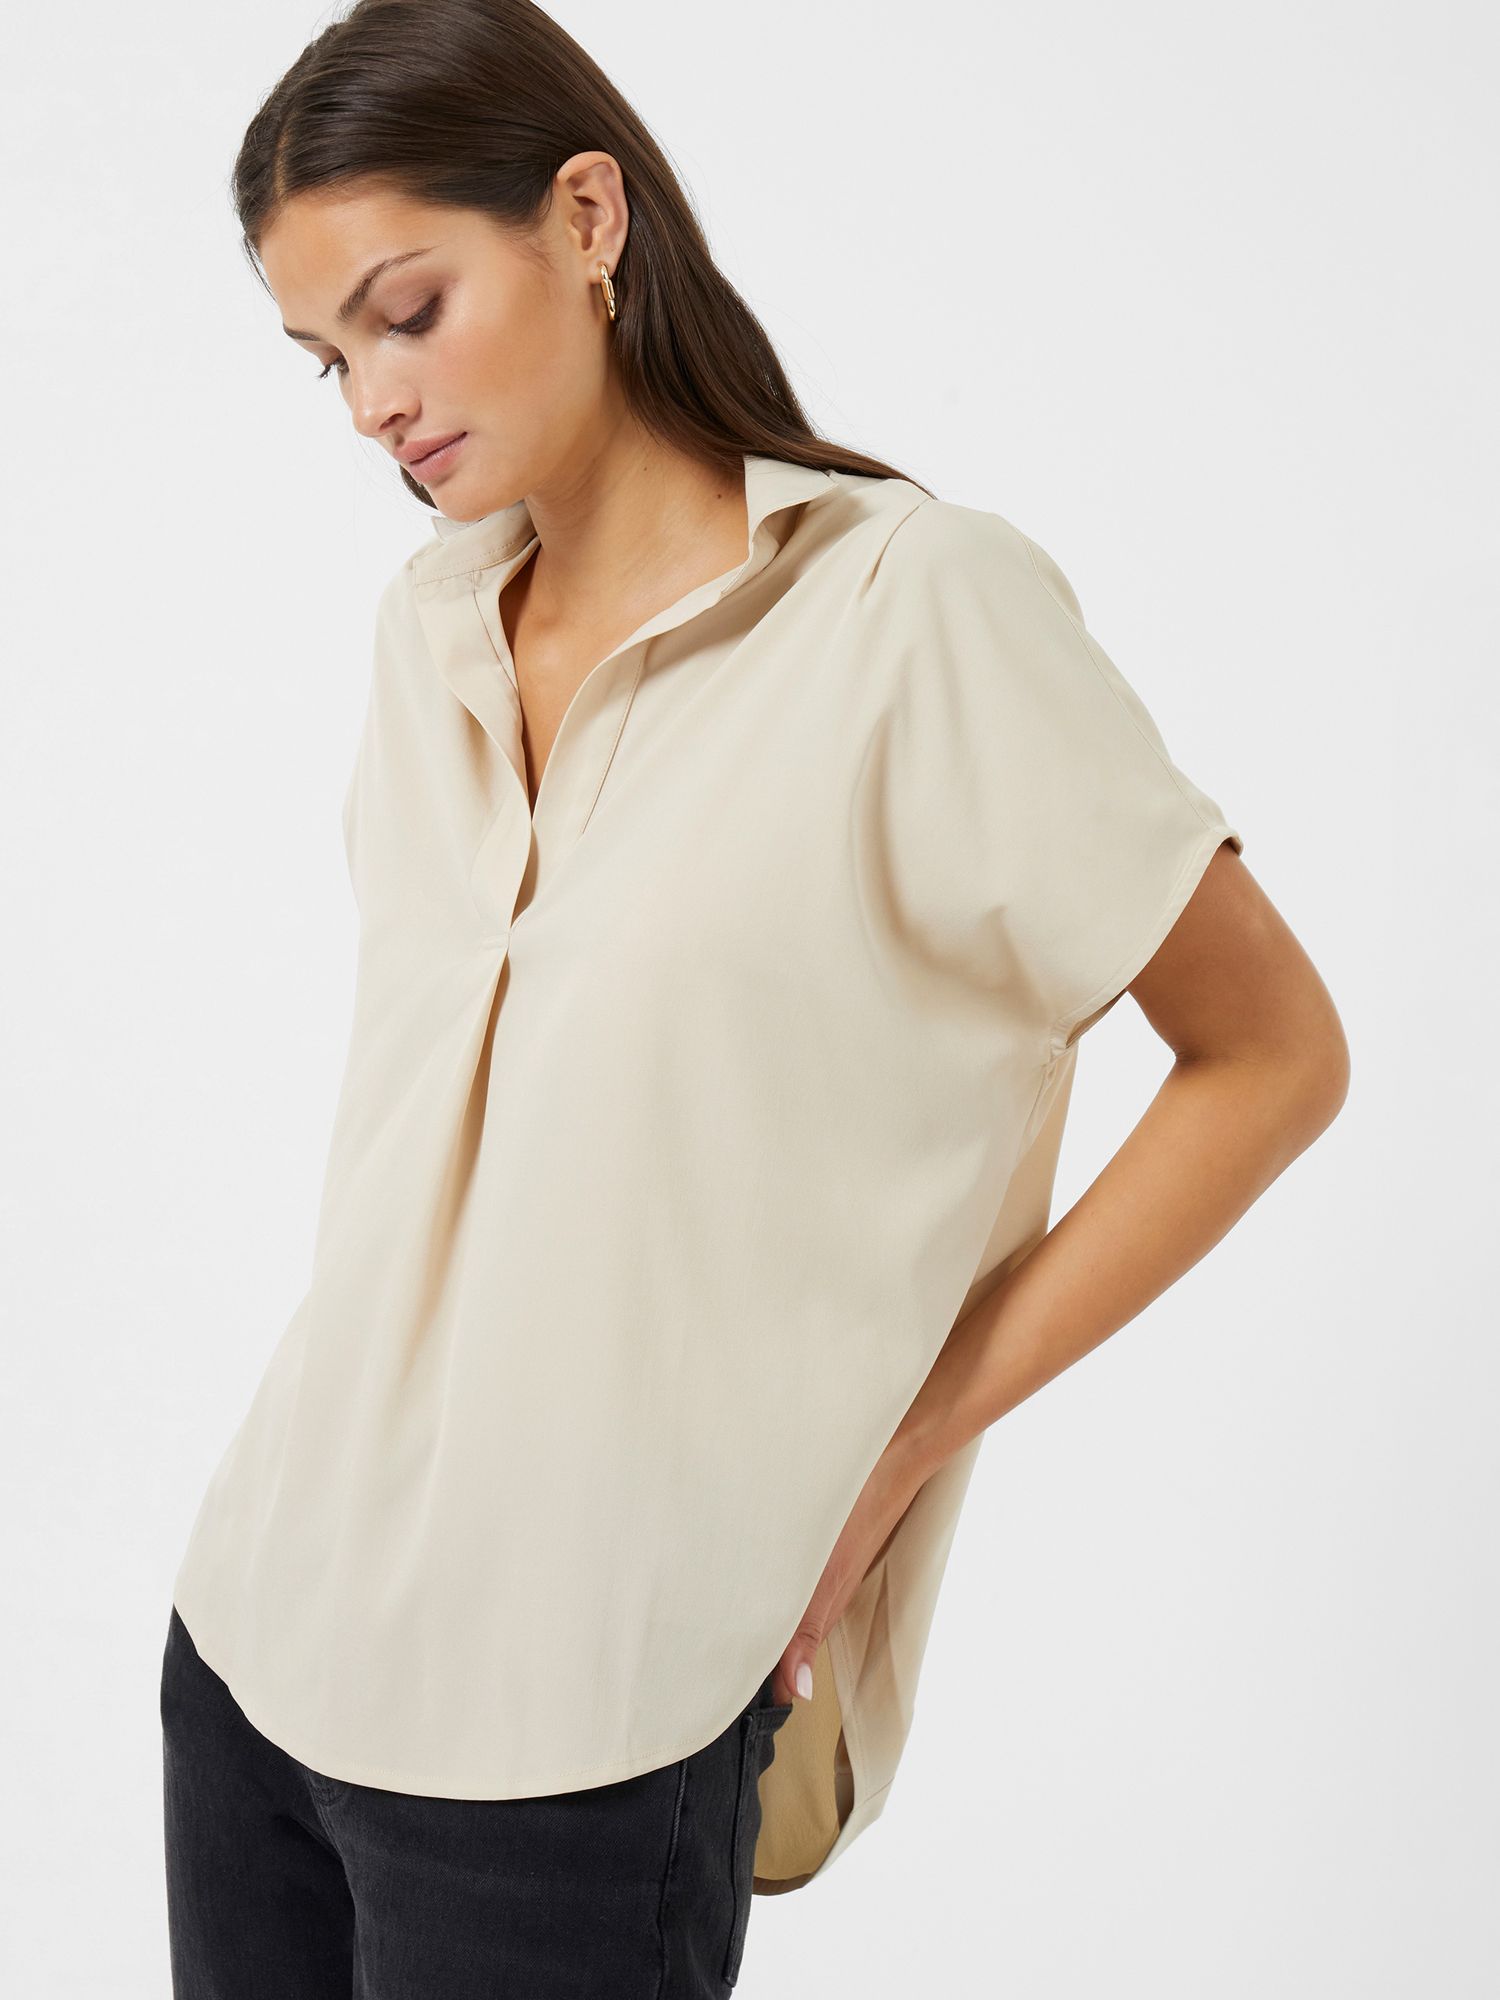 French Connection Crepe Short Sleeve V-Neck Blouse, Wild Wheat, S